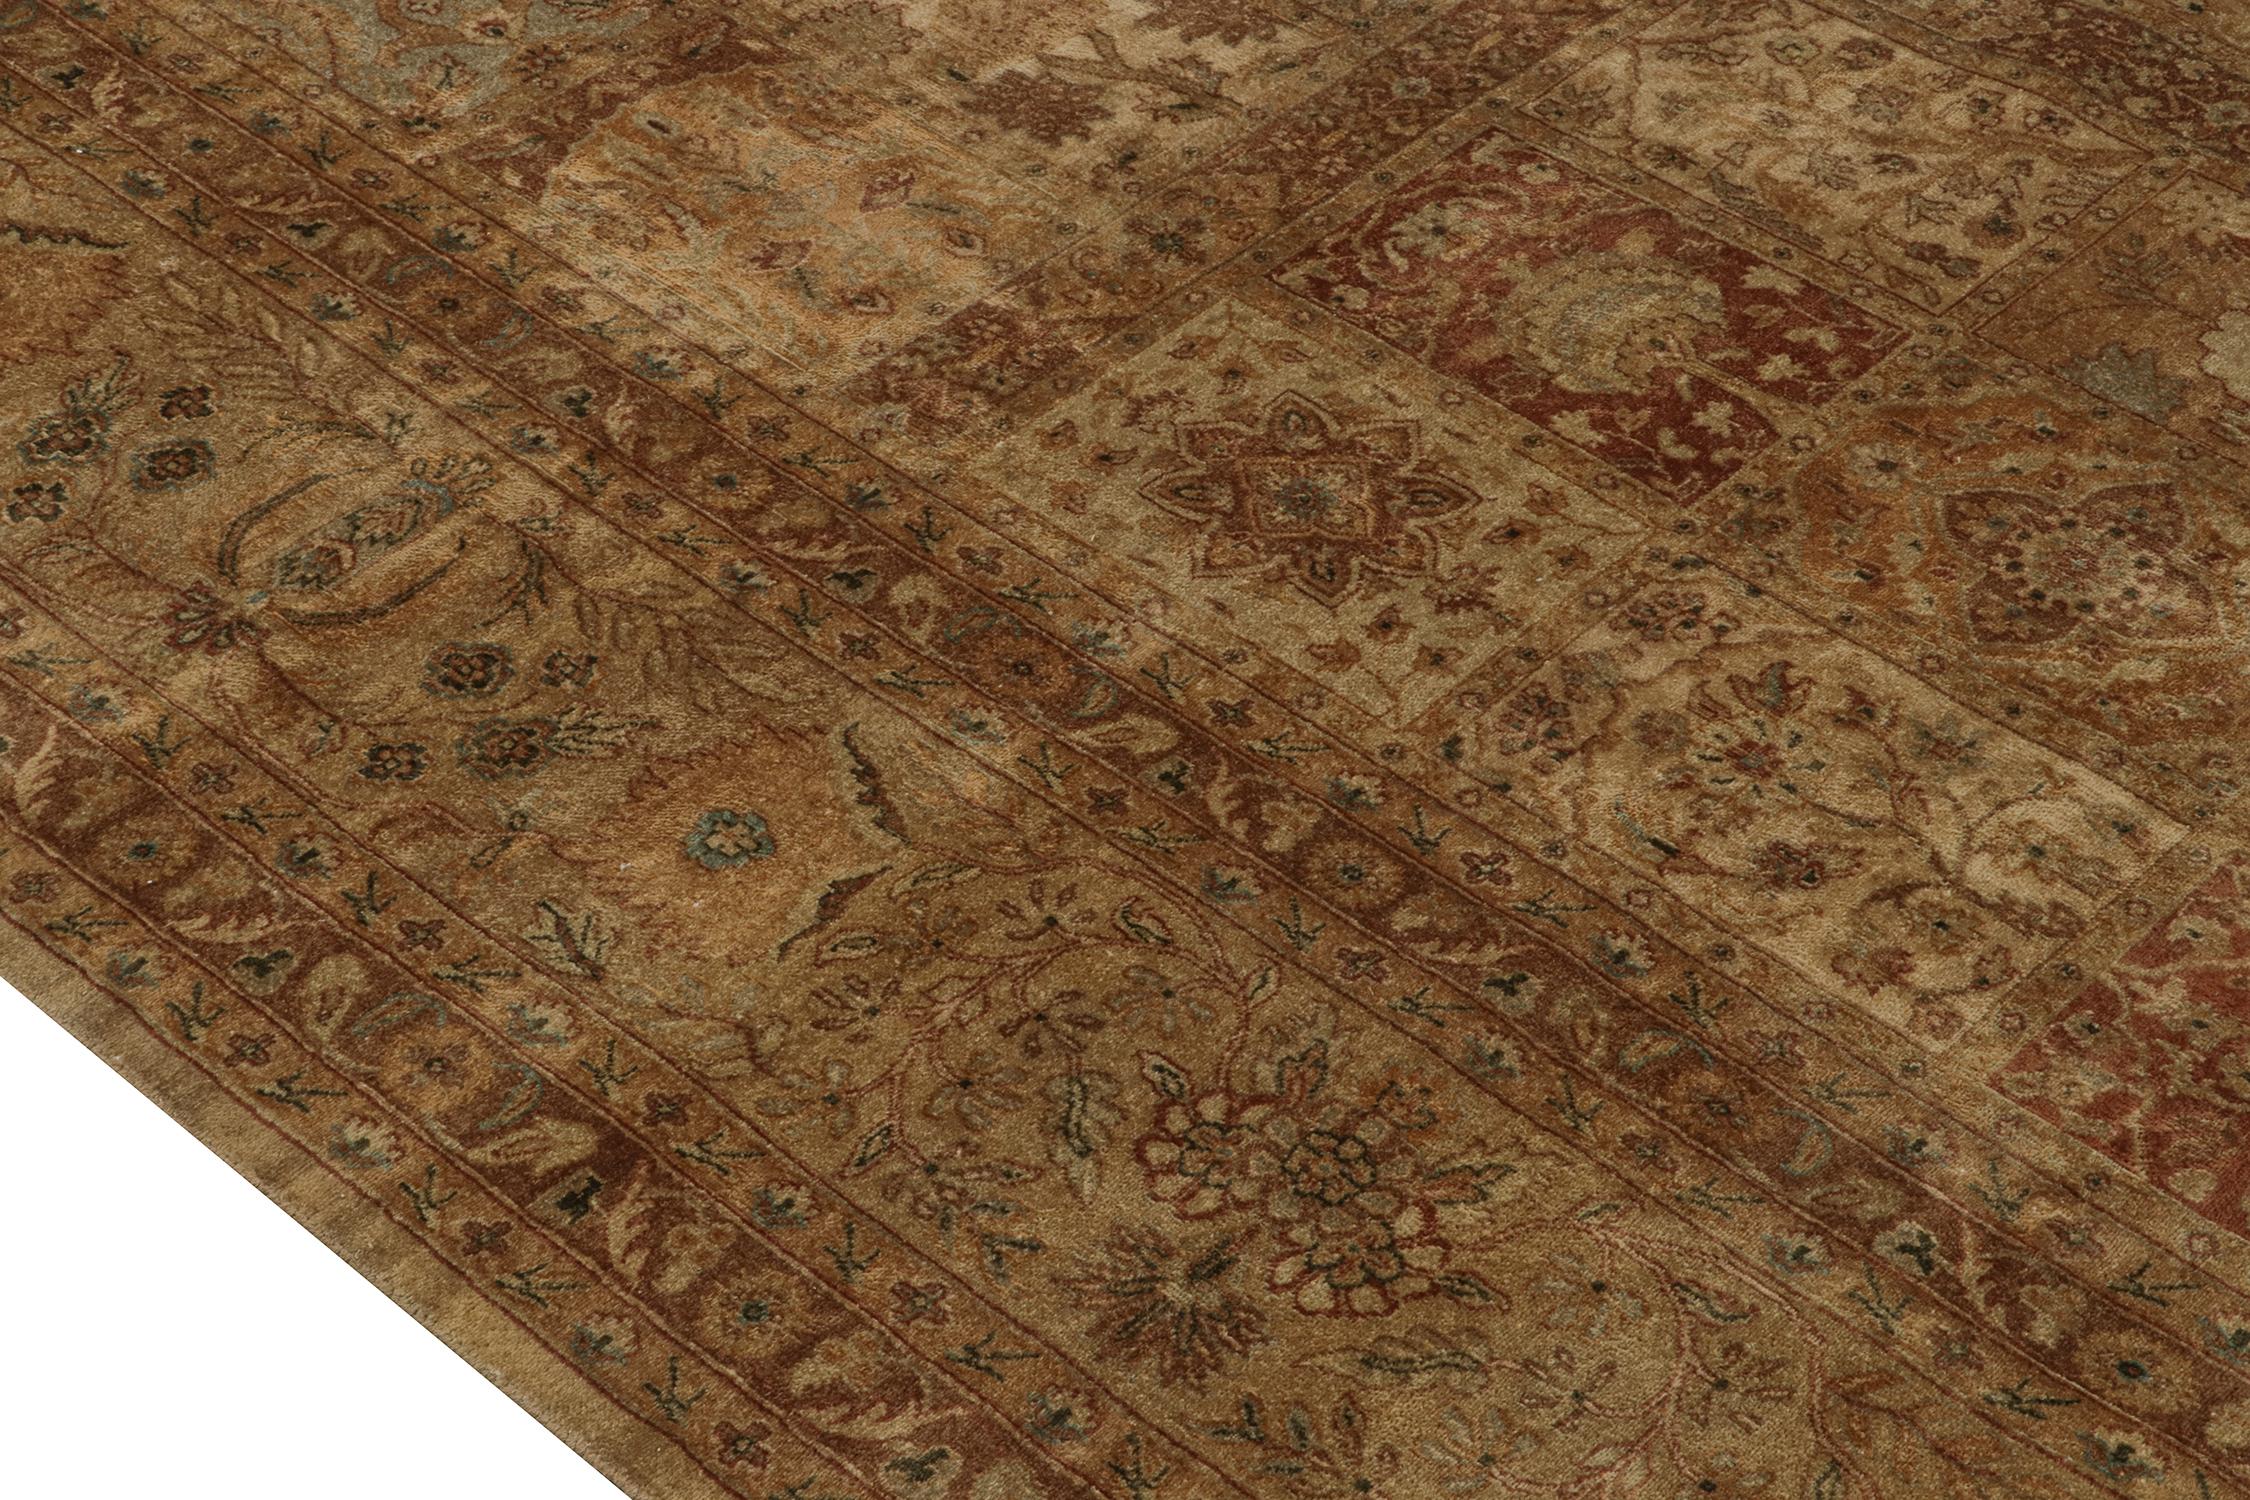 Contemporary Rug & Kilim’s Classic Persian Style Rug in Beige-Brown and Red Floral Patterns